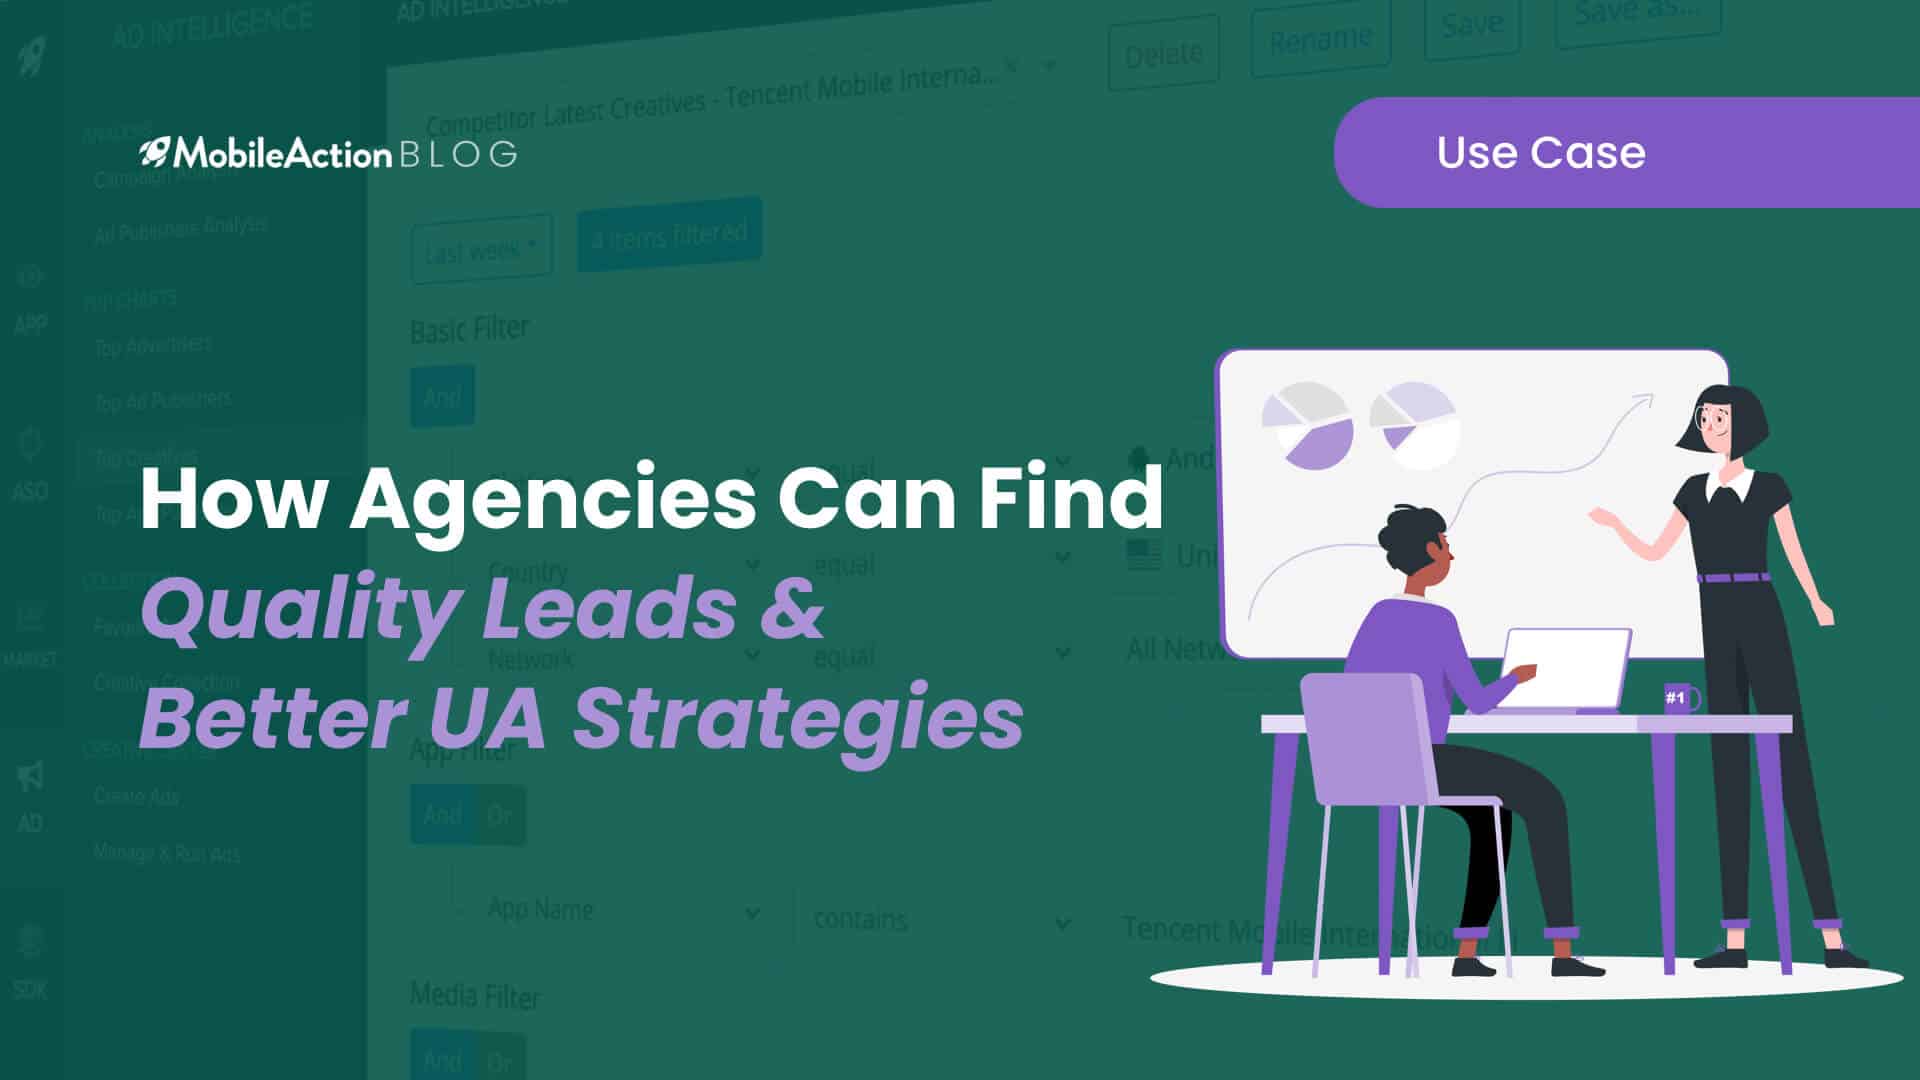 How Agencies can Find Quality Leads & Better UA Strategies